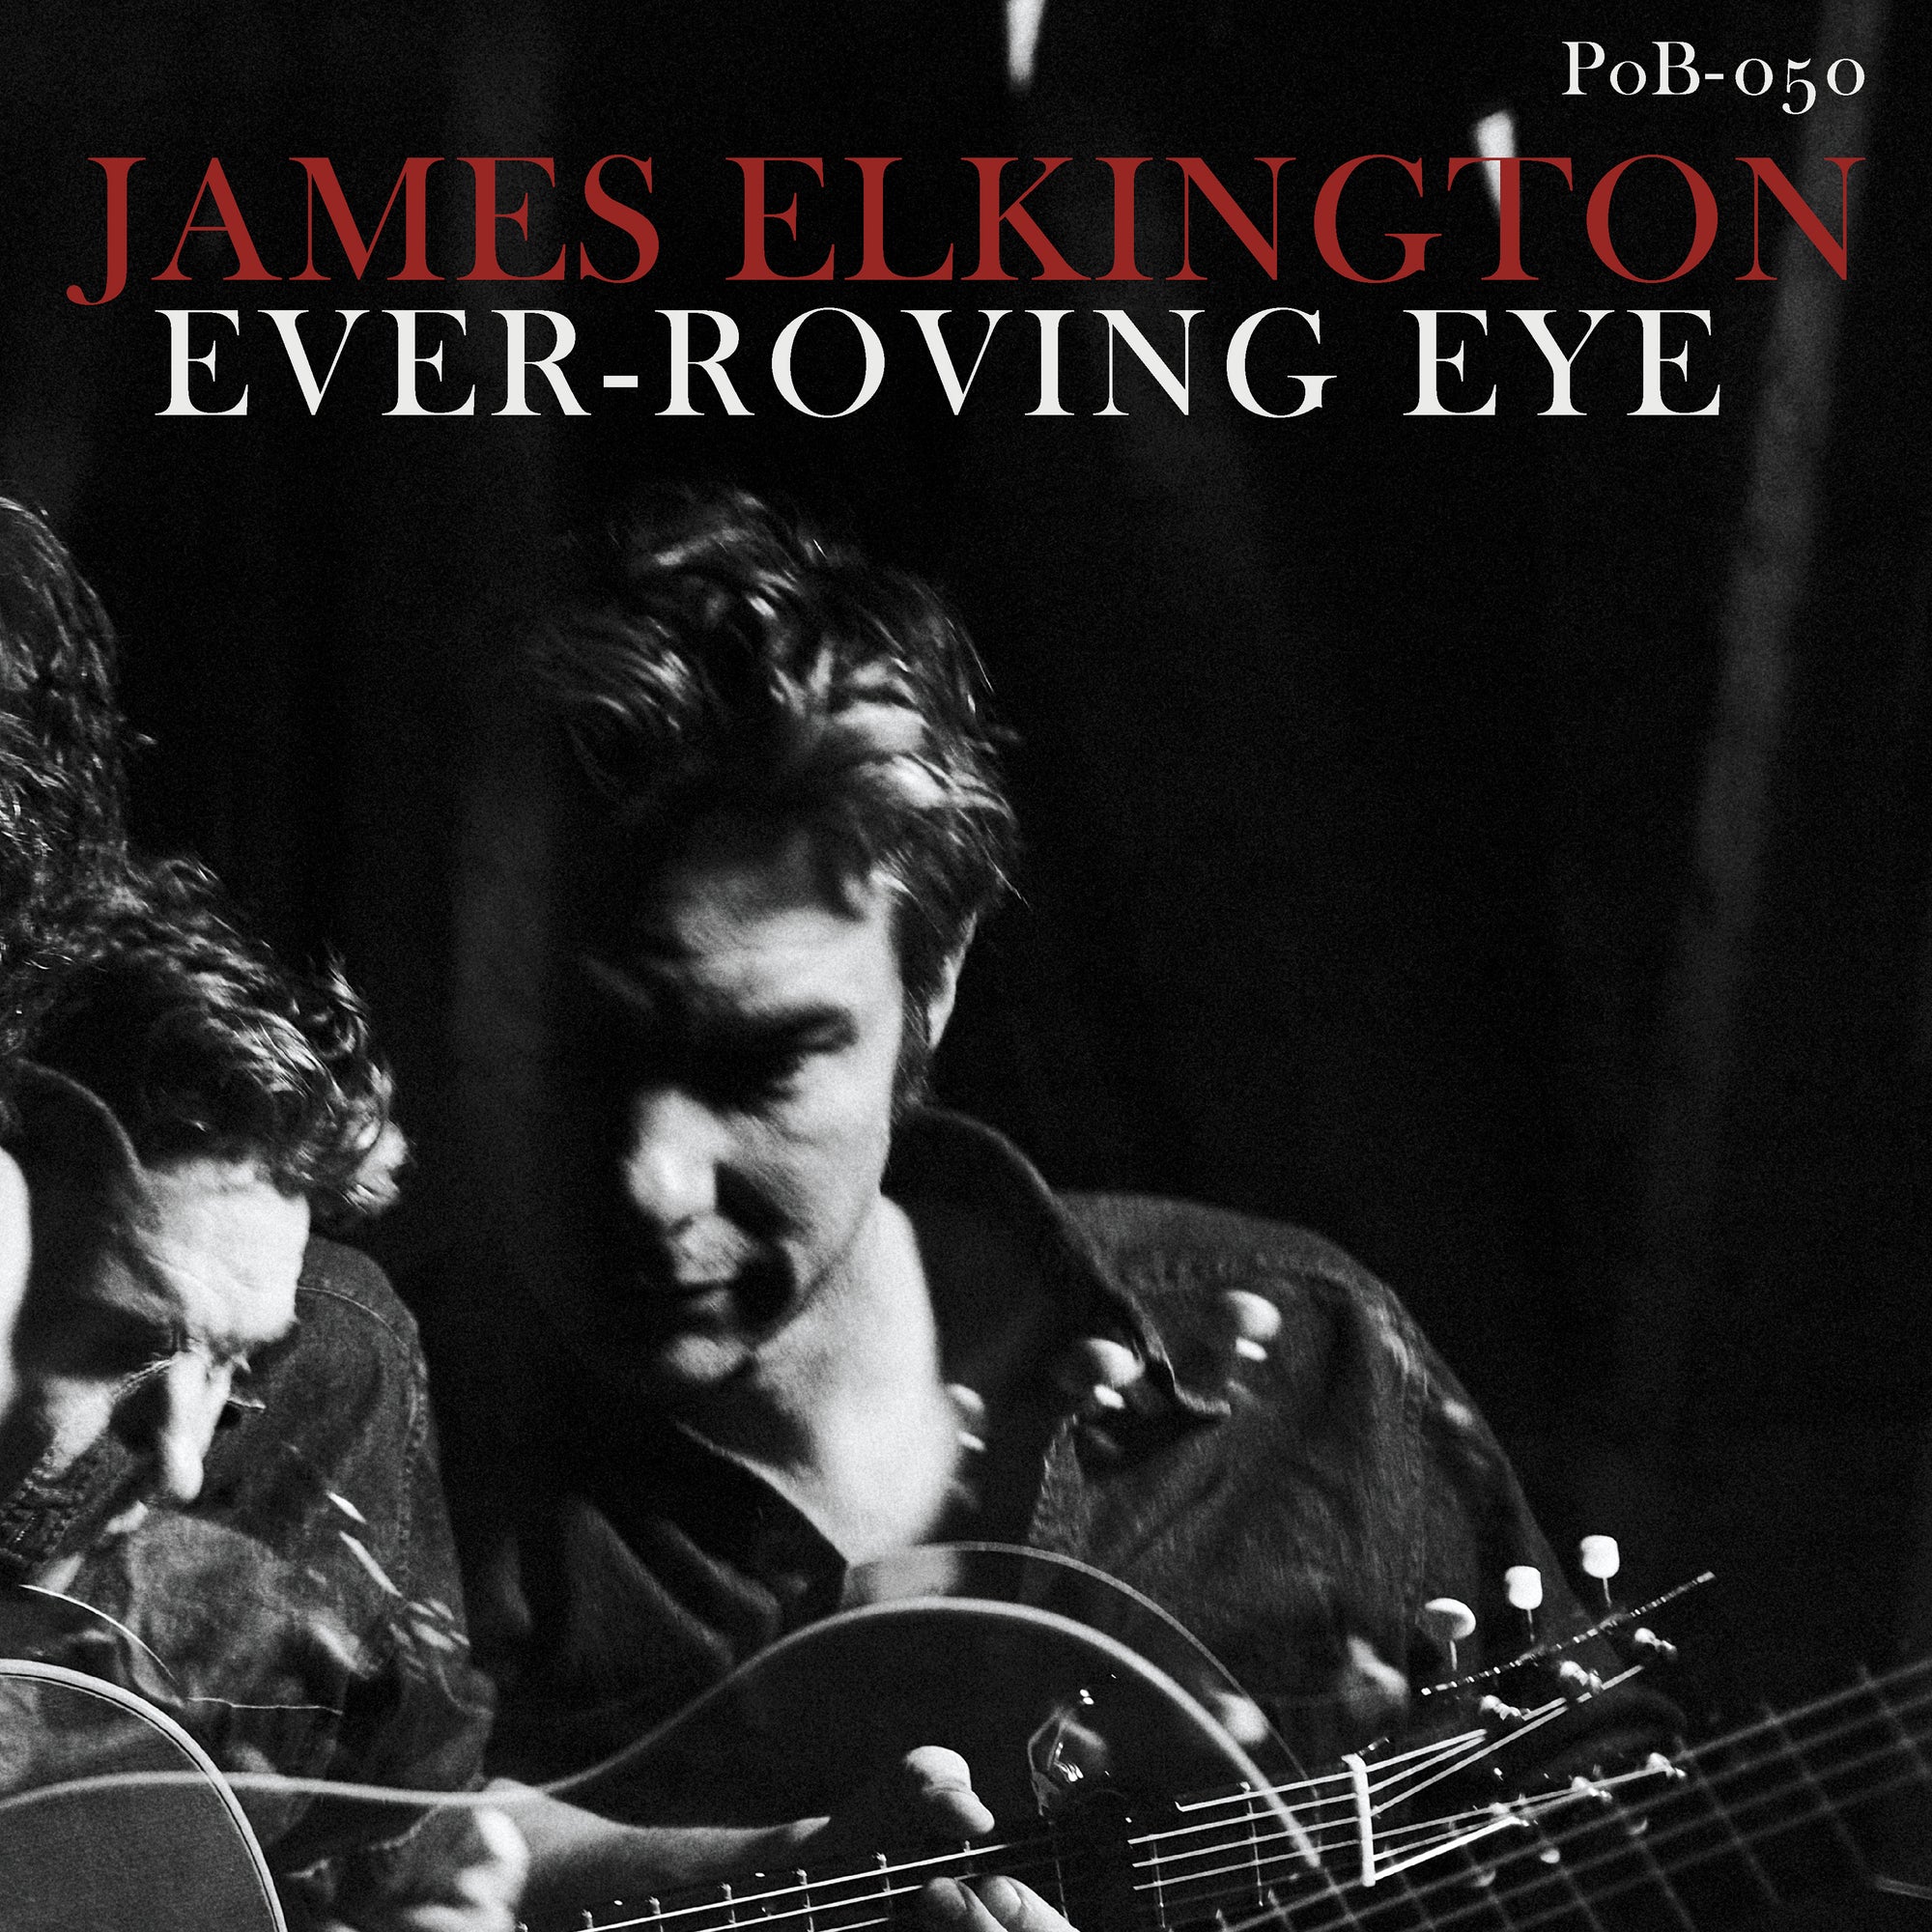 Album cover for Tandem Coffee Roasters' "James Elkington - Ever-Roving Eye" released by Paradise of Bachelors, featuring a close-up photo of two musicians, one playing a guitar, in dark moody lighting.